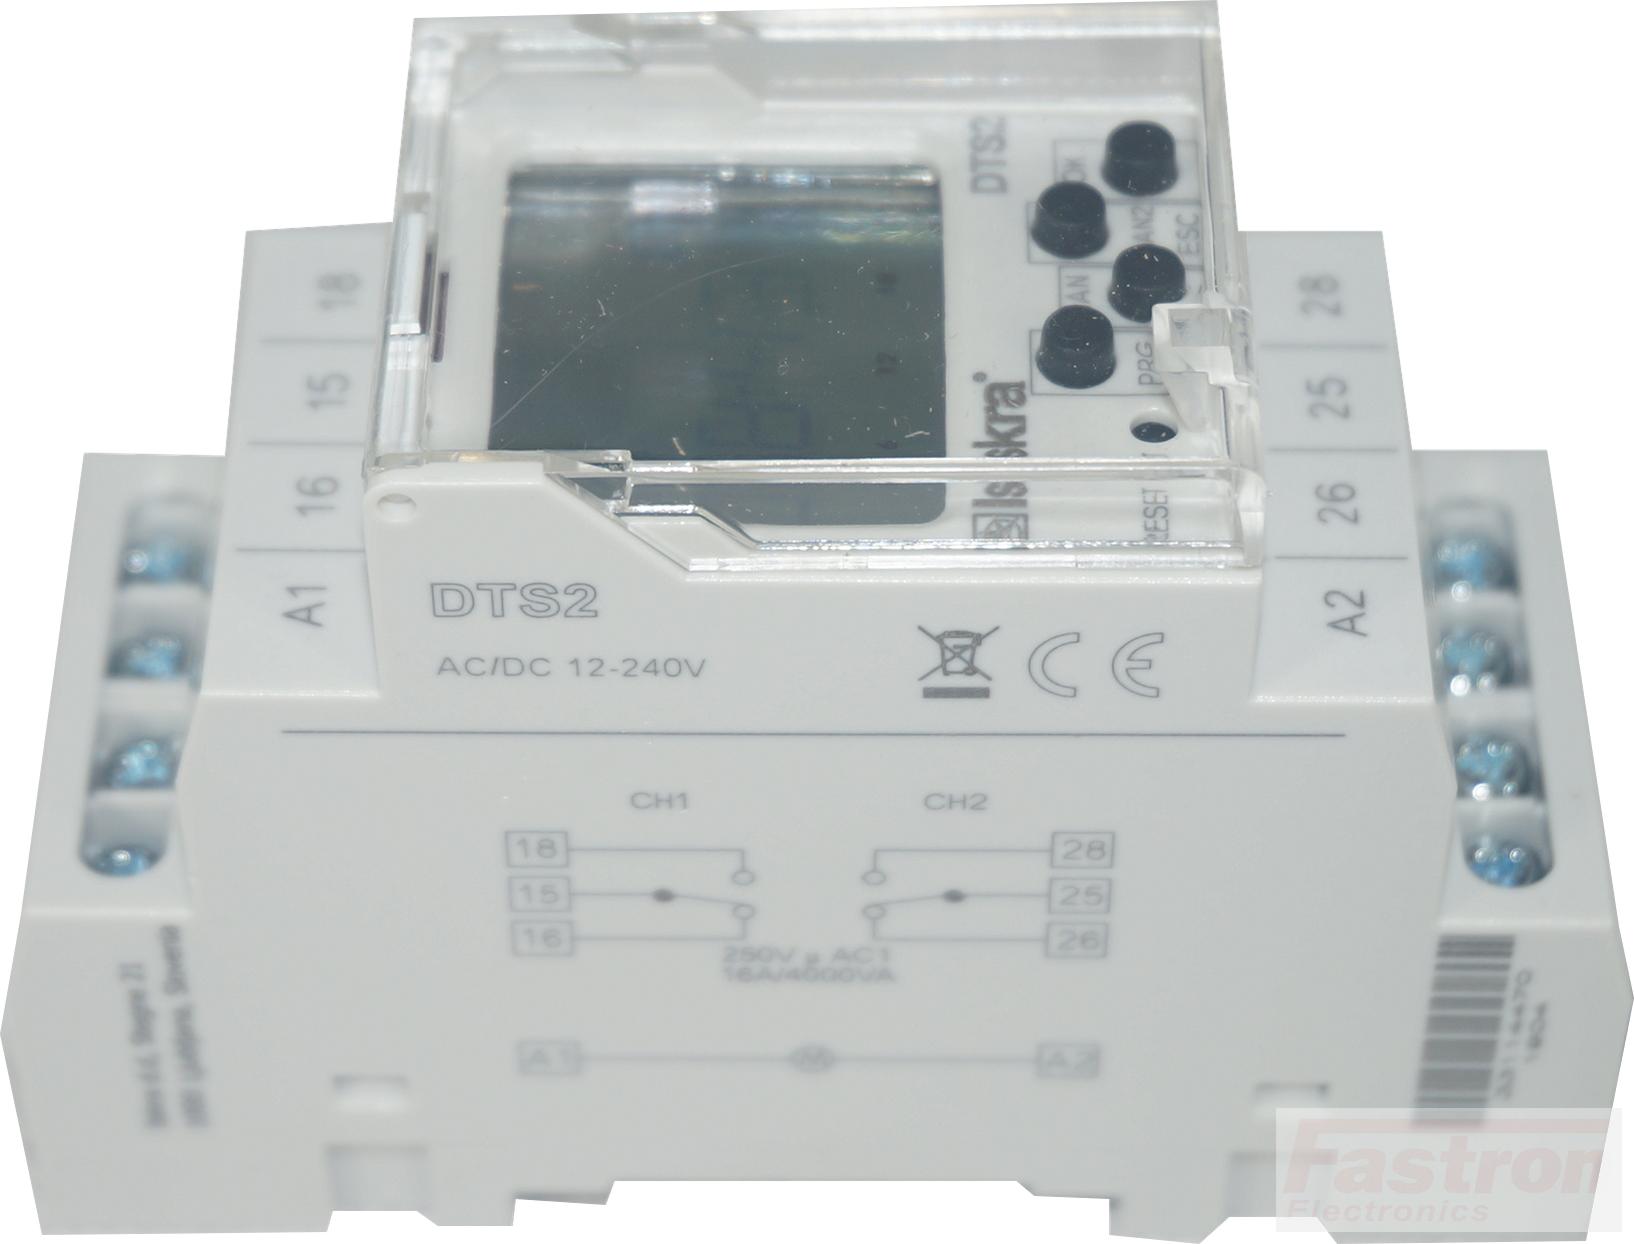 DTS 5 UNI, Dual Digital Time Switch with 2 independant Daily Weekly, Monthly, and Yearly program, Universal 12-240VAC/DC Power Supply/Control, 2 x 16 Amp SPST CO Relay-Timer-Iskra Doo-Fastron Electronics Store